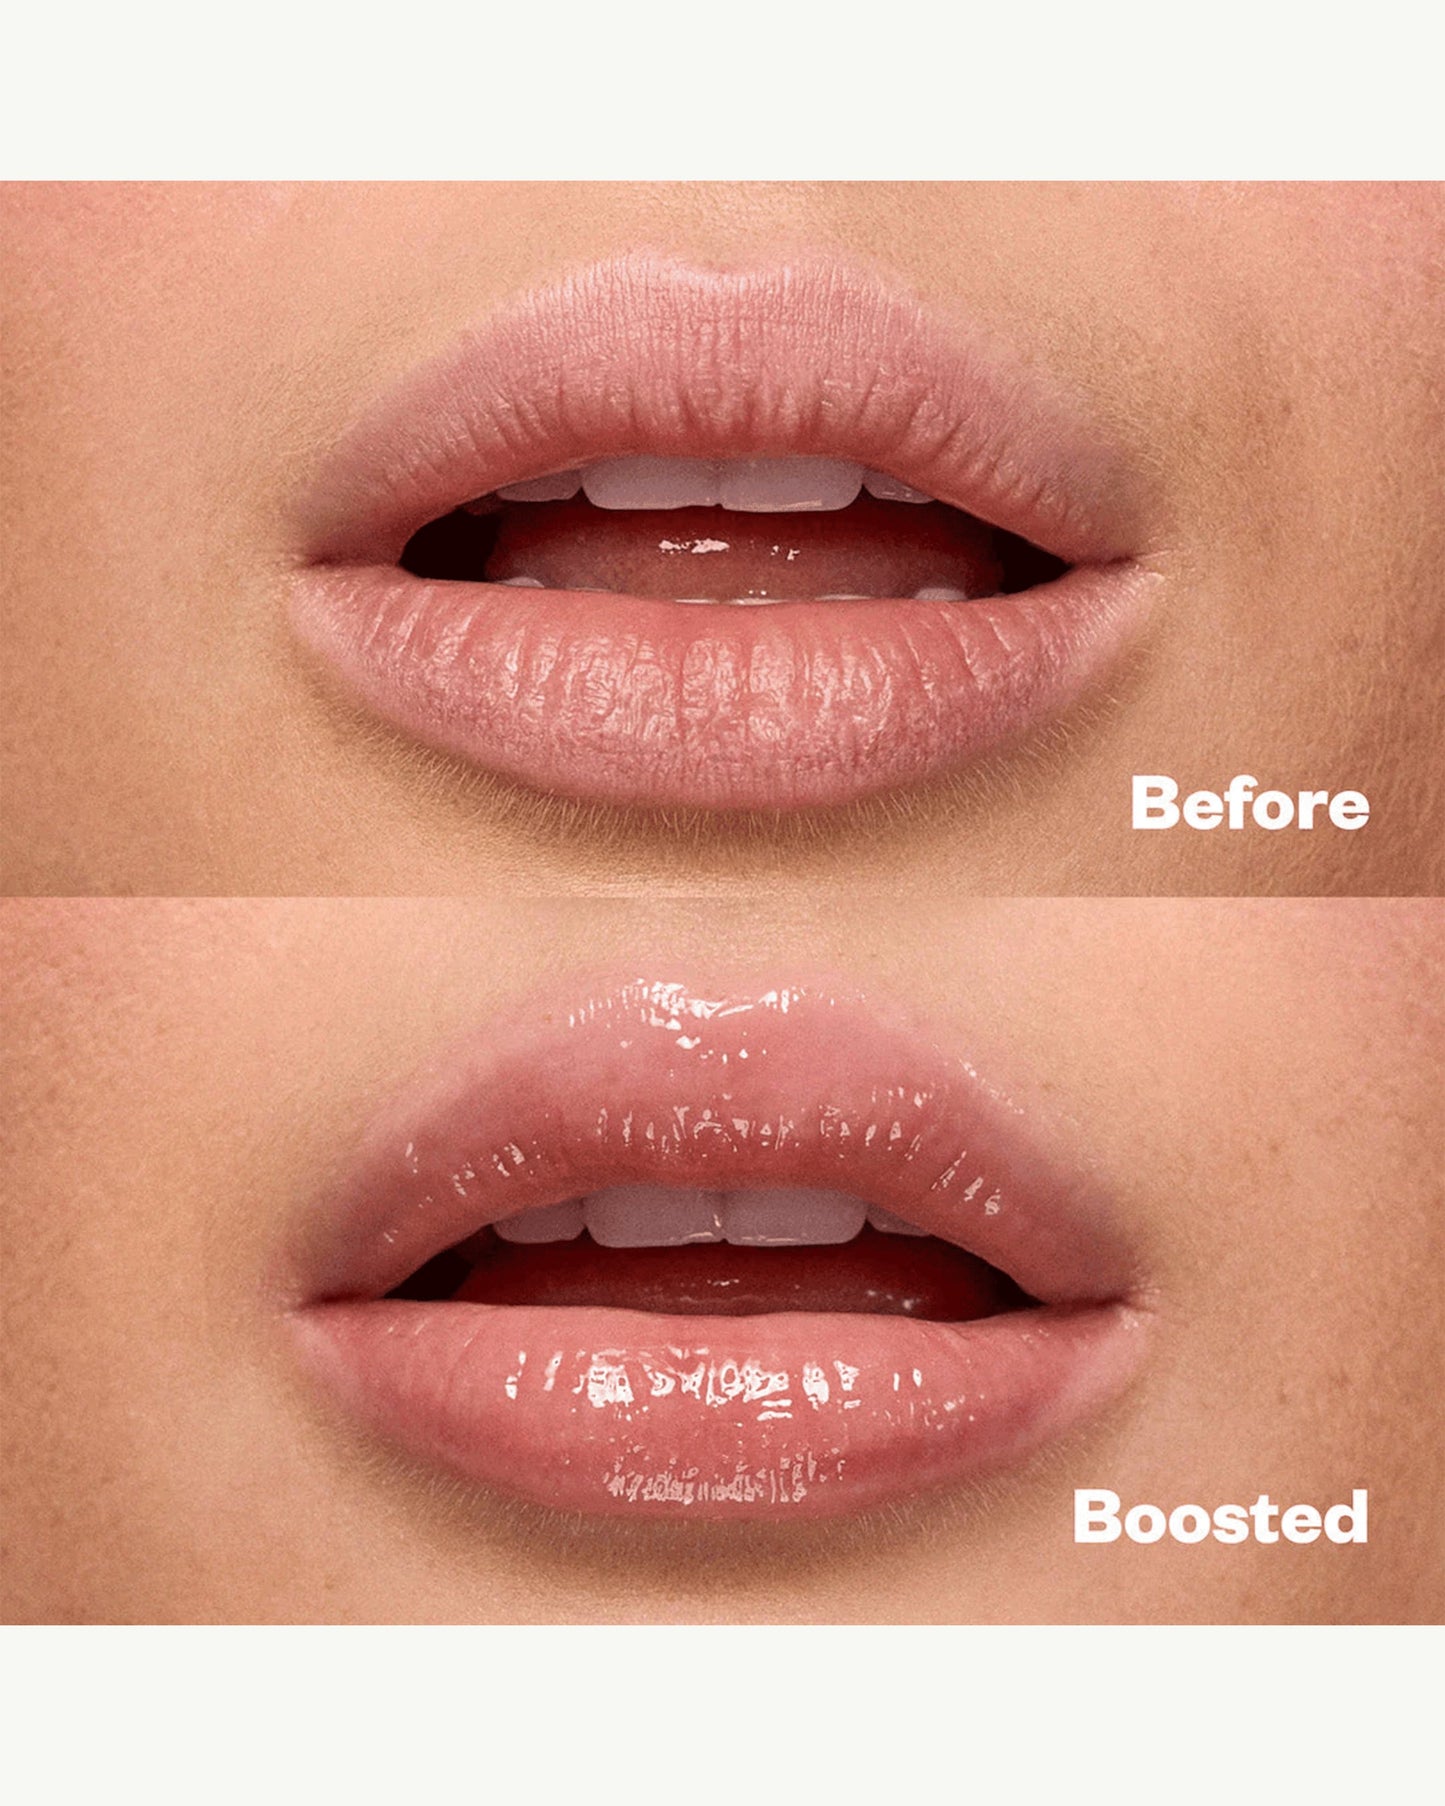 Plump & Juicy Lip Booster Buttery Treatment